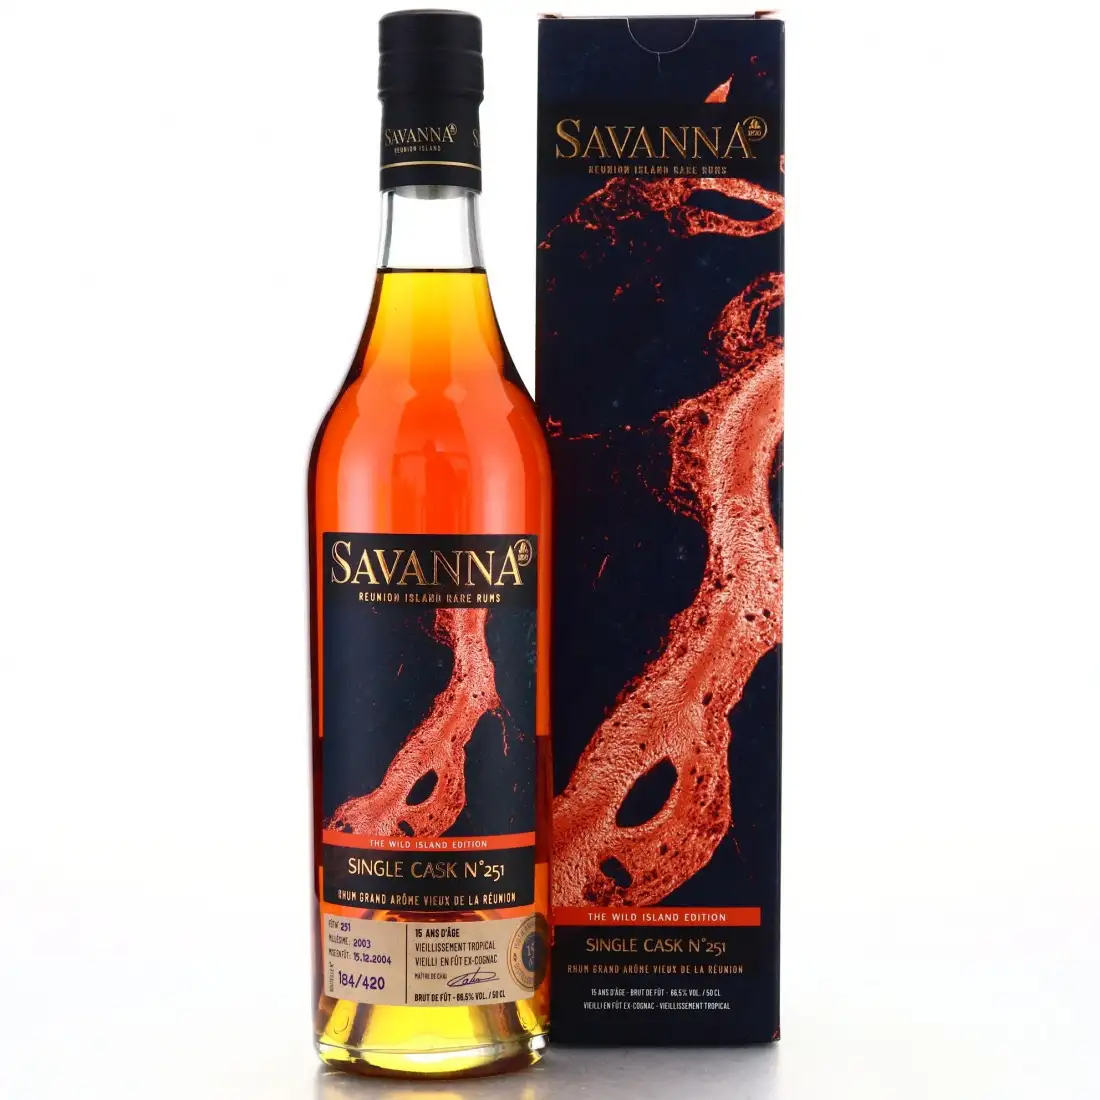 Image of the front of the bottle of the rum The Wild Island Edition